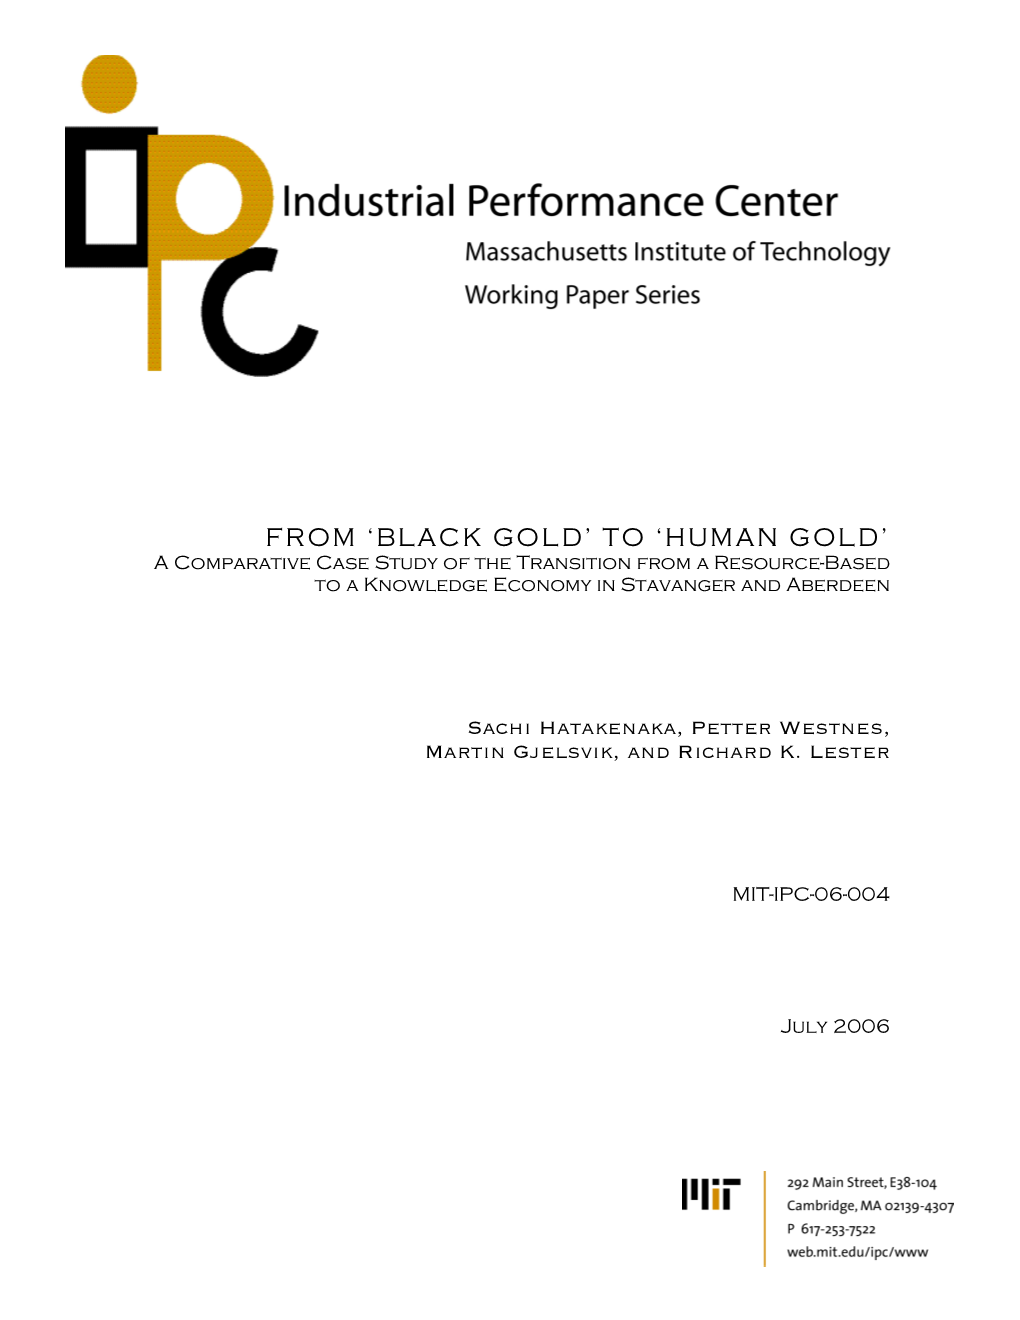 HUMAN GOLD’ a Comparative Case Study of the Transition from a Resource-Based to a Knowledge Economy in Stavanger and Aberdeen